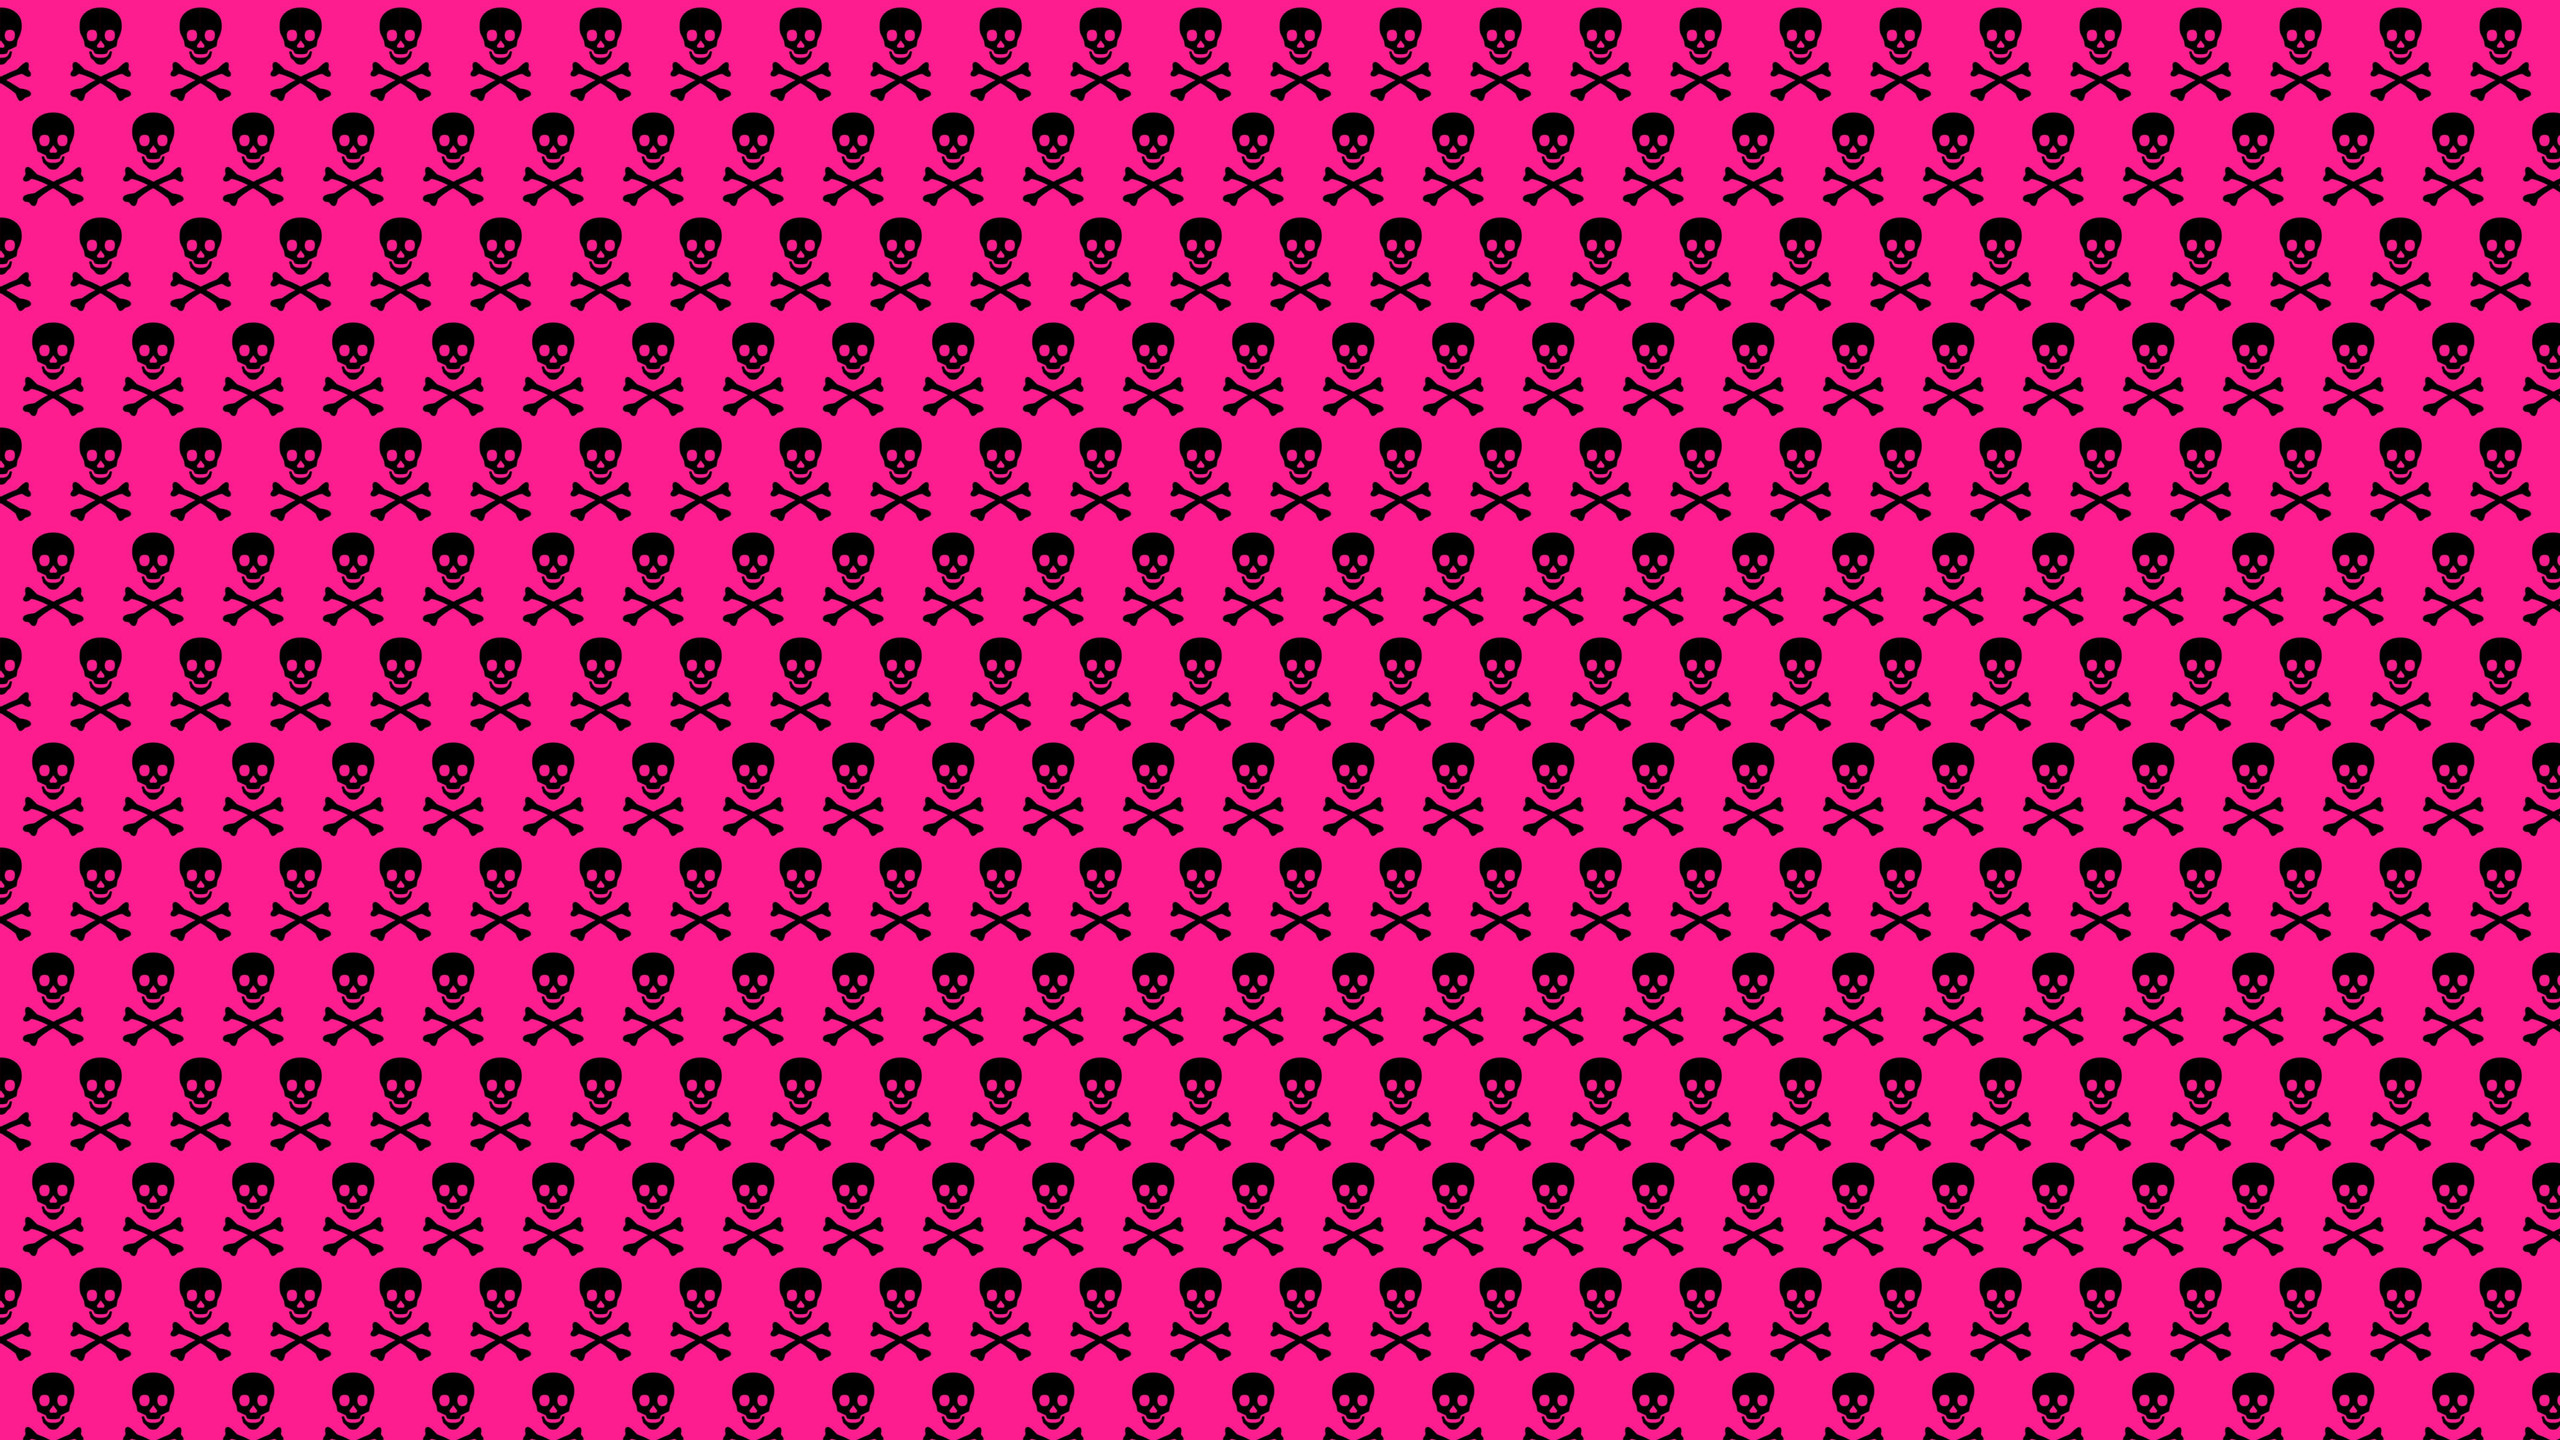 2560x1440 Wallpapers For > Pink Skull Wallpapers